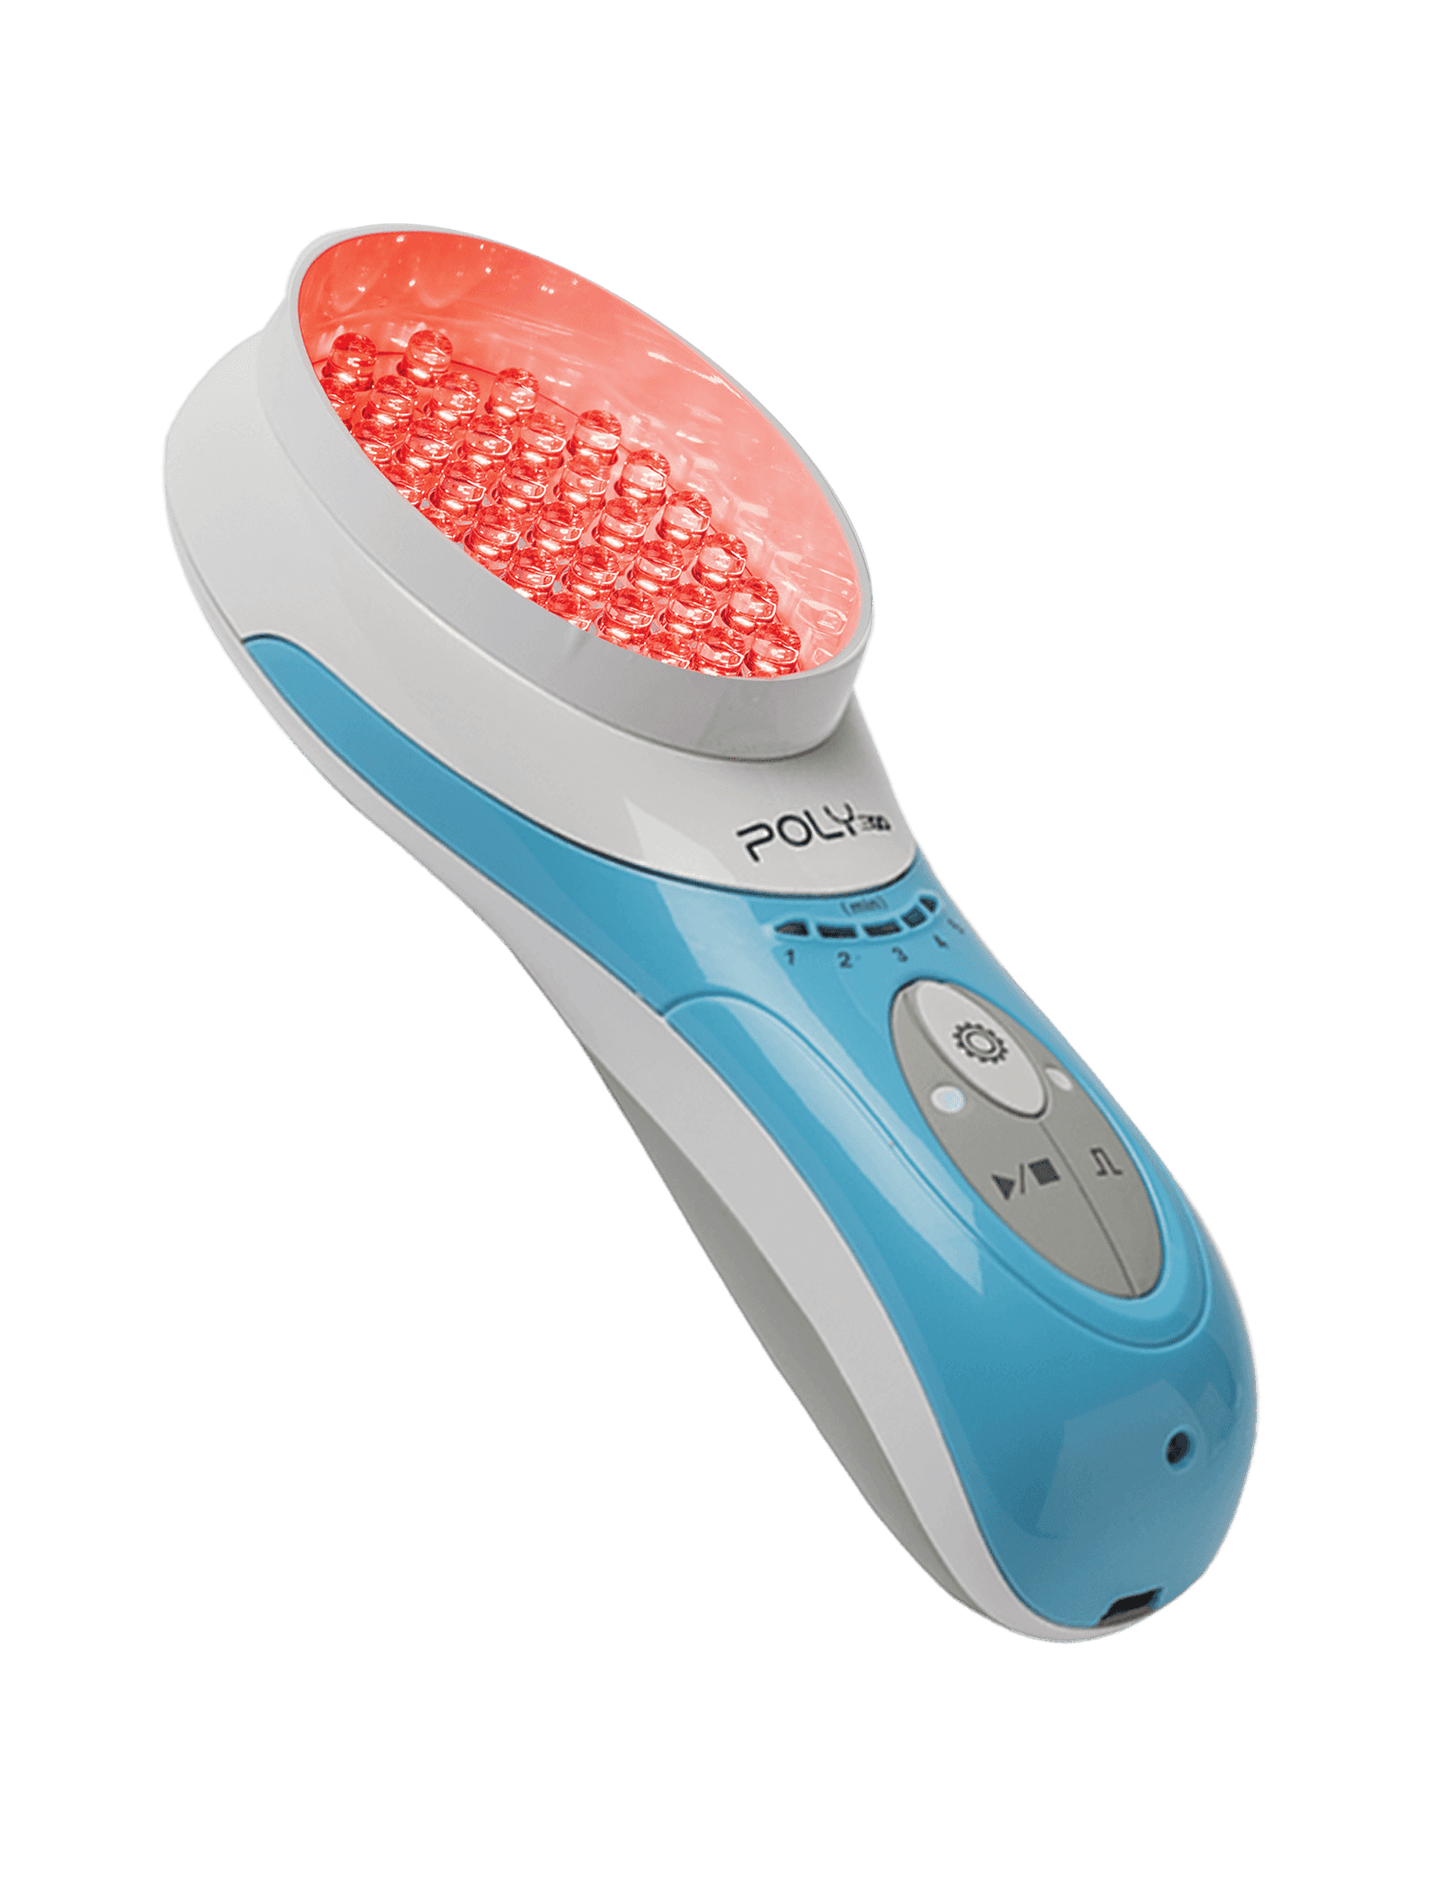 POLY - Go Rejuv Cordless Portable Red Light Therapy - Superb Massage Tables